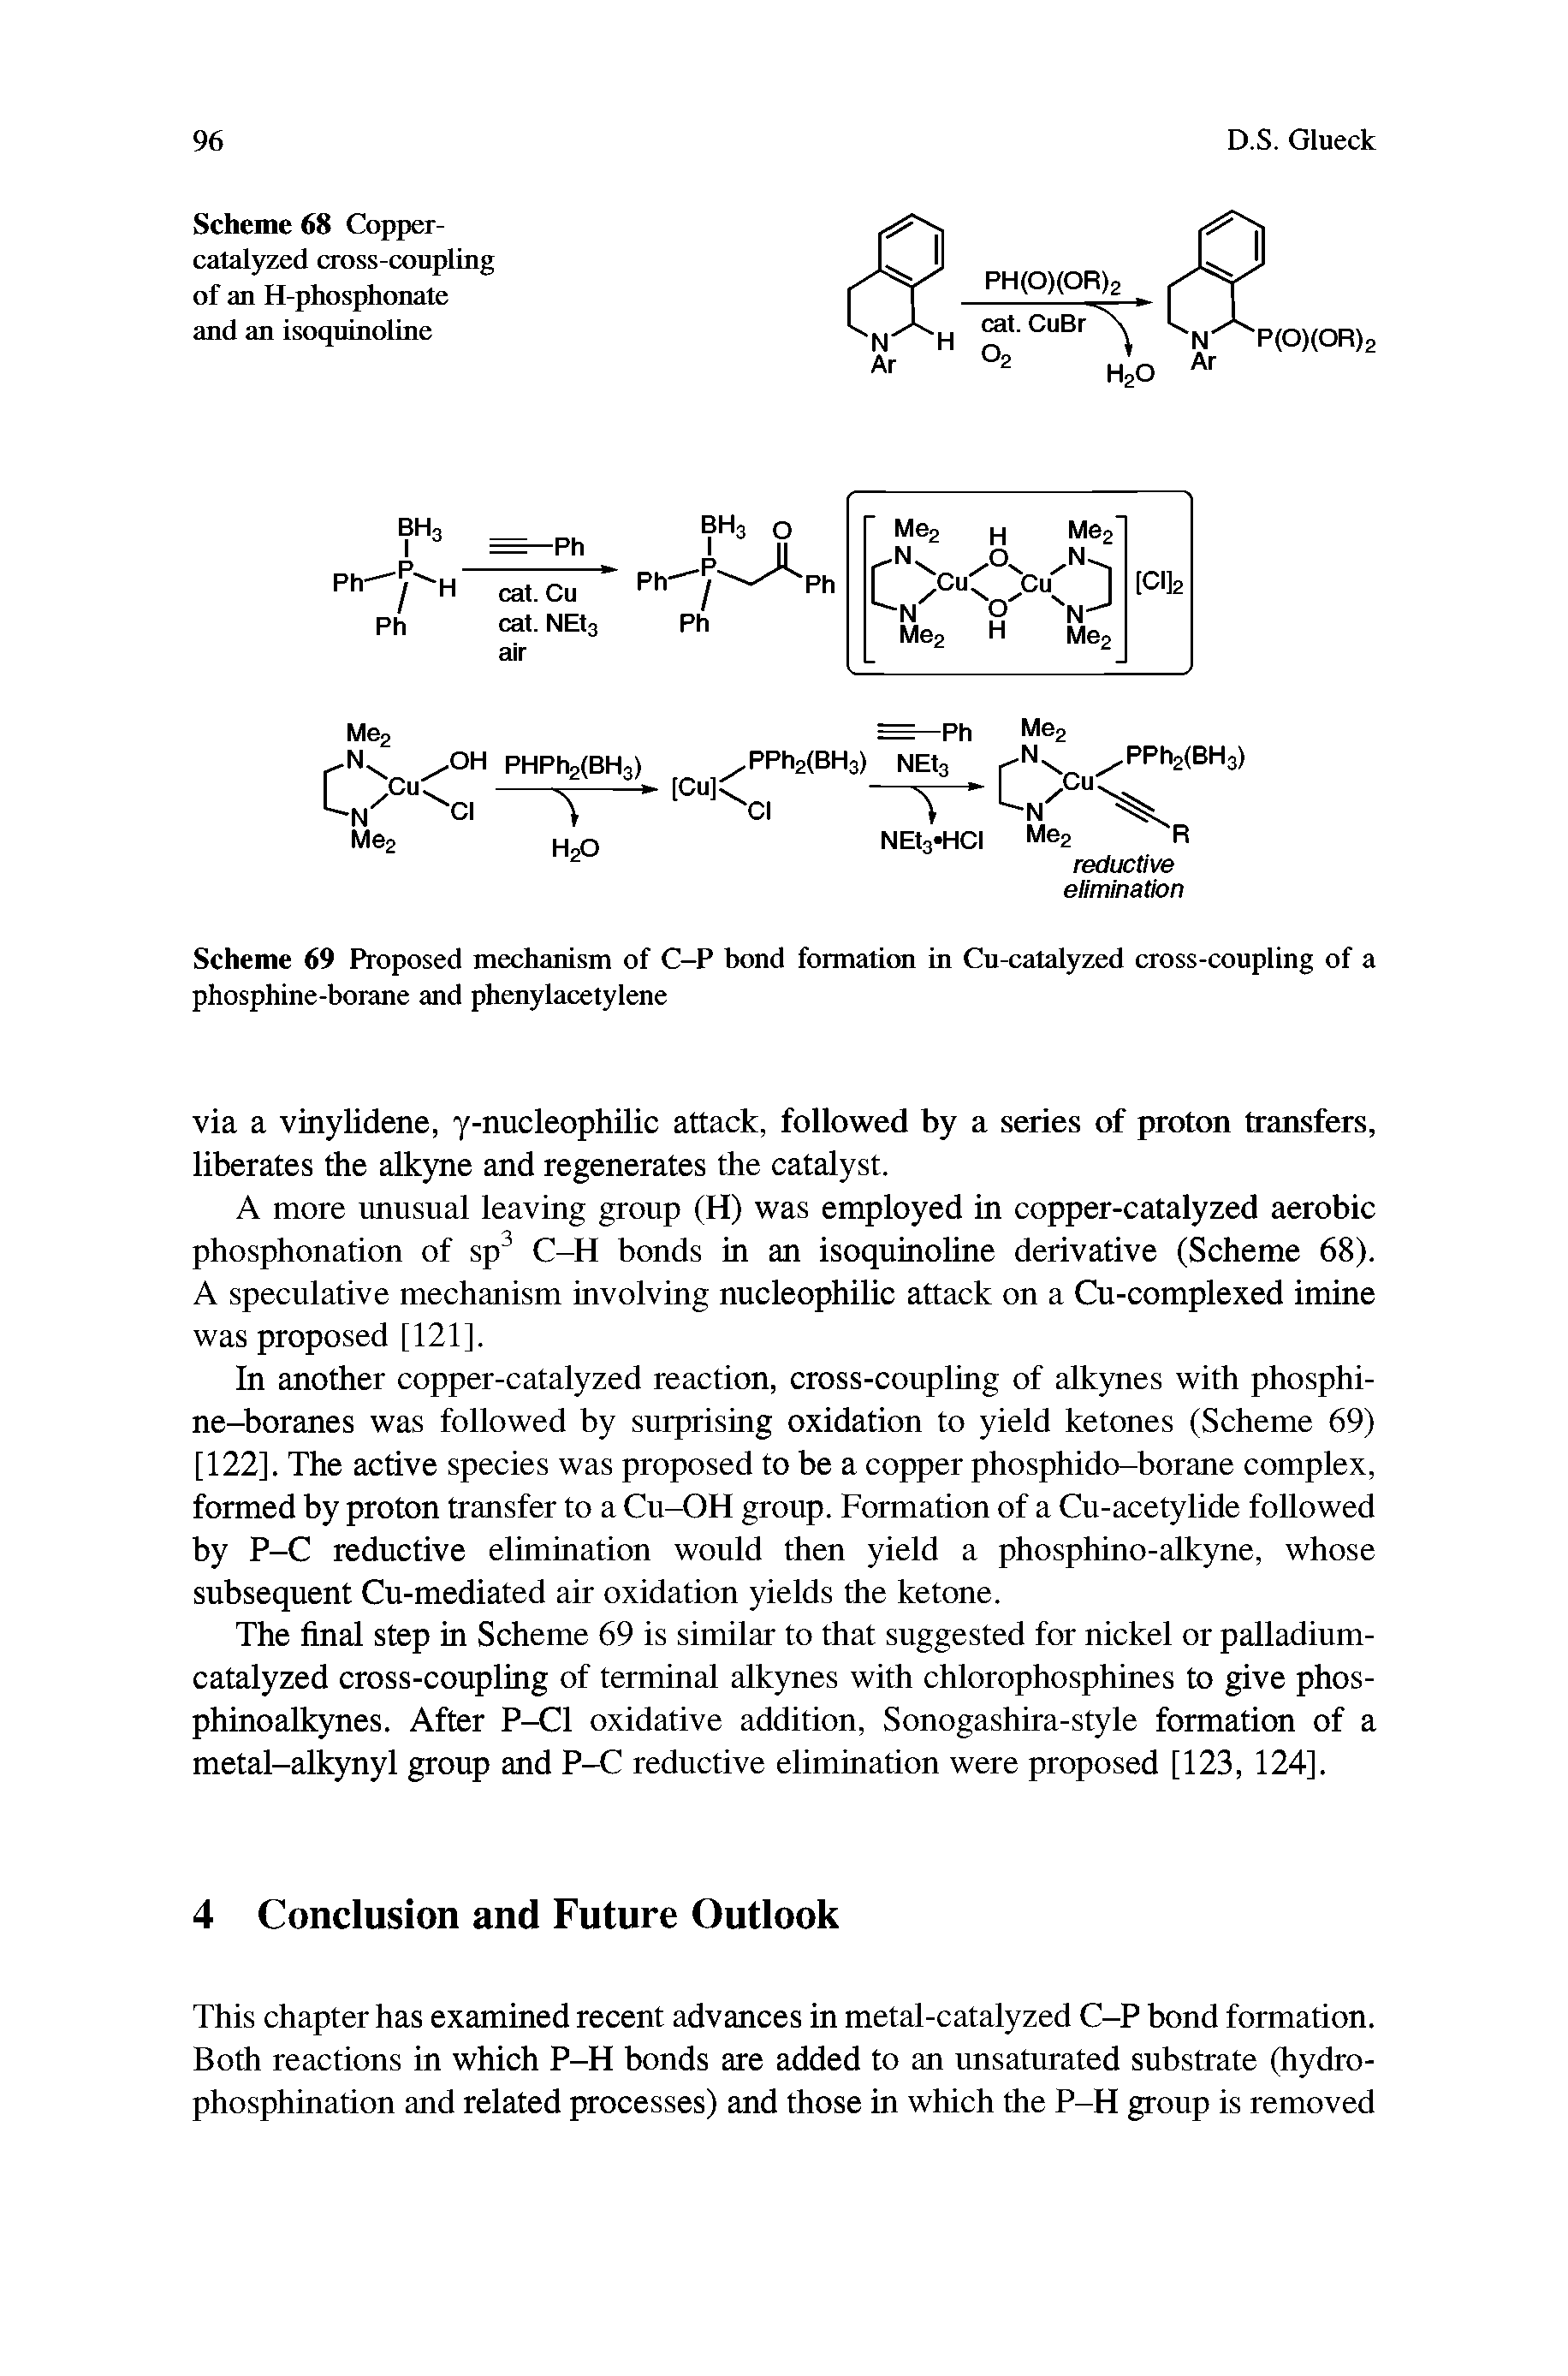 Scheme 69 Proposed mechanism of C-P bond formation in Cu-catalyzed cross-coupling of a phosphine-borane and phenylacetylene...